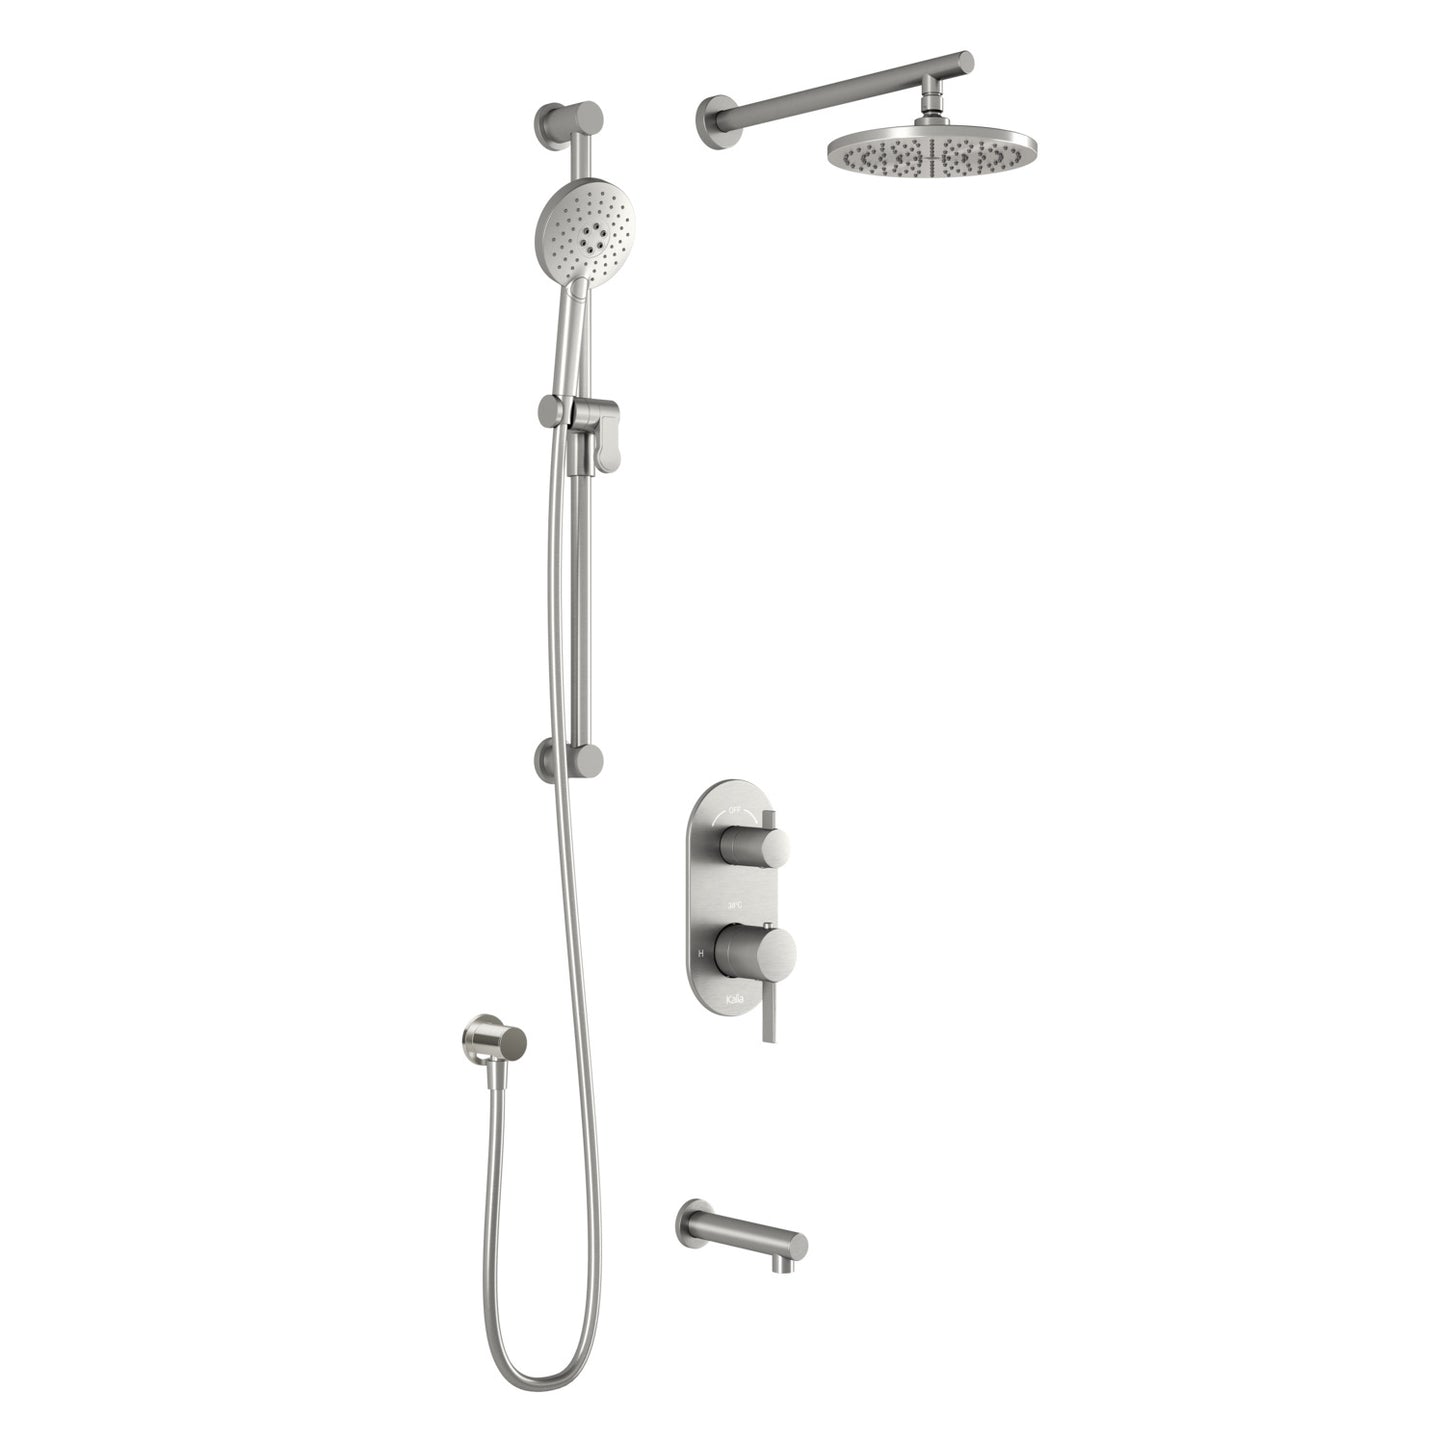 Kalia RoundOne TD3 (Valve Not Included) AQUATONIK T/P with Diverter Shower System with Wall Arm (BF1643)